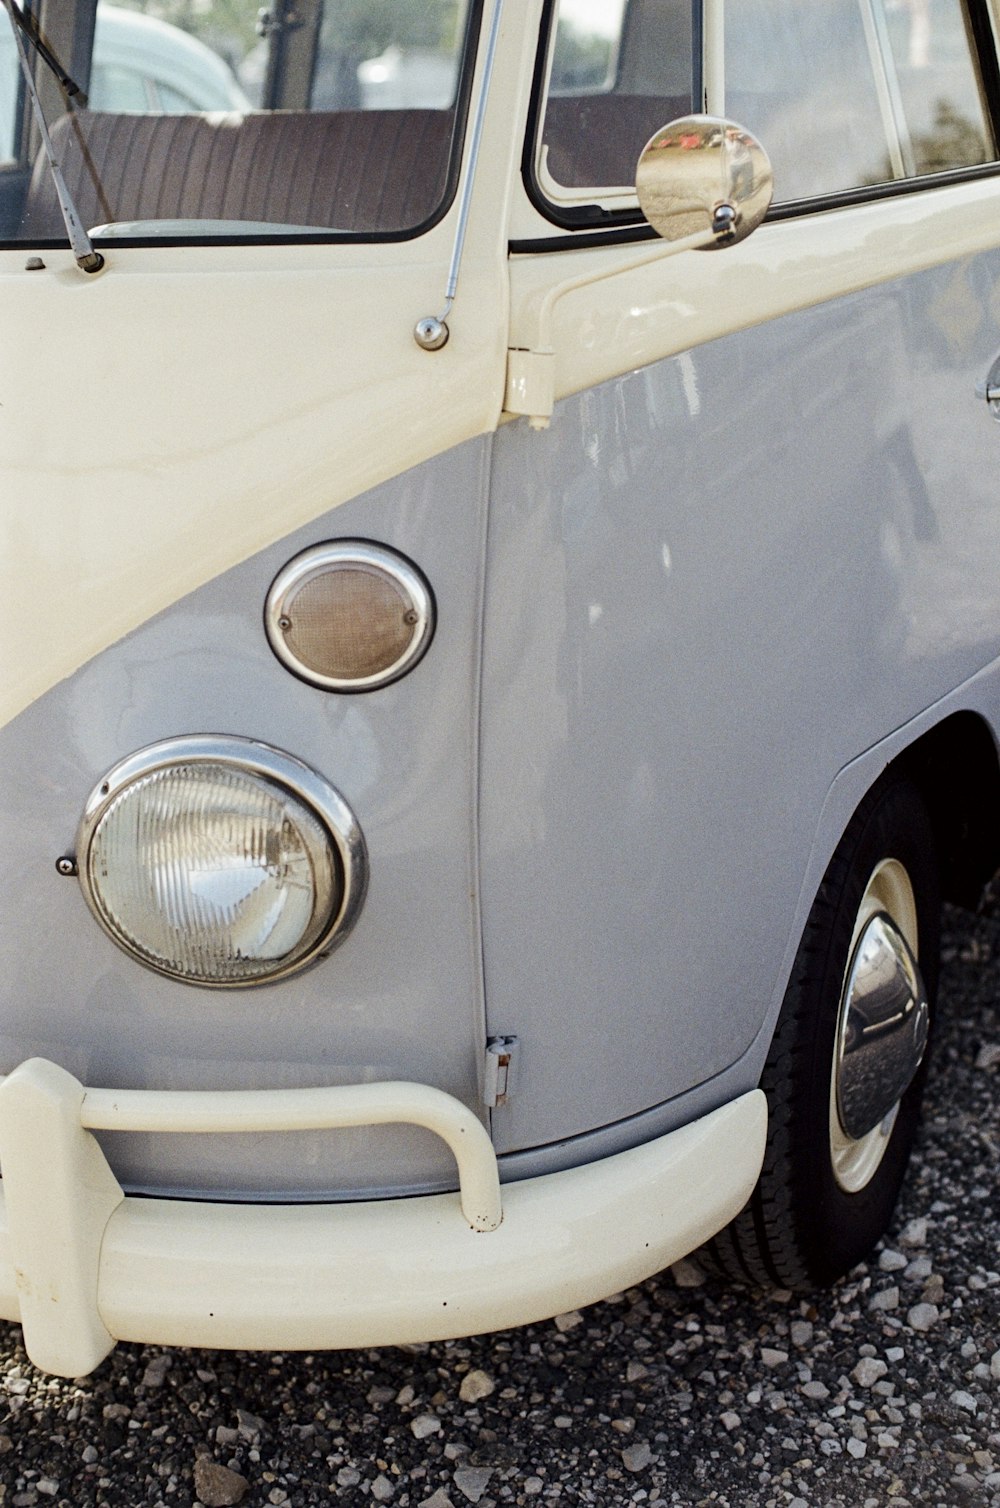 a gray and white vw bus parked in a parking lot